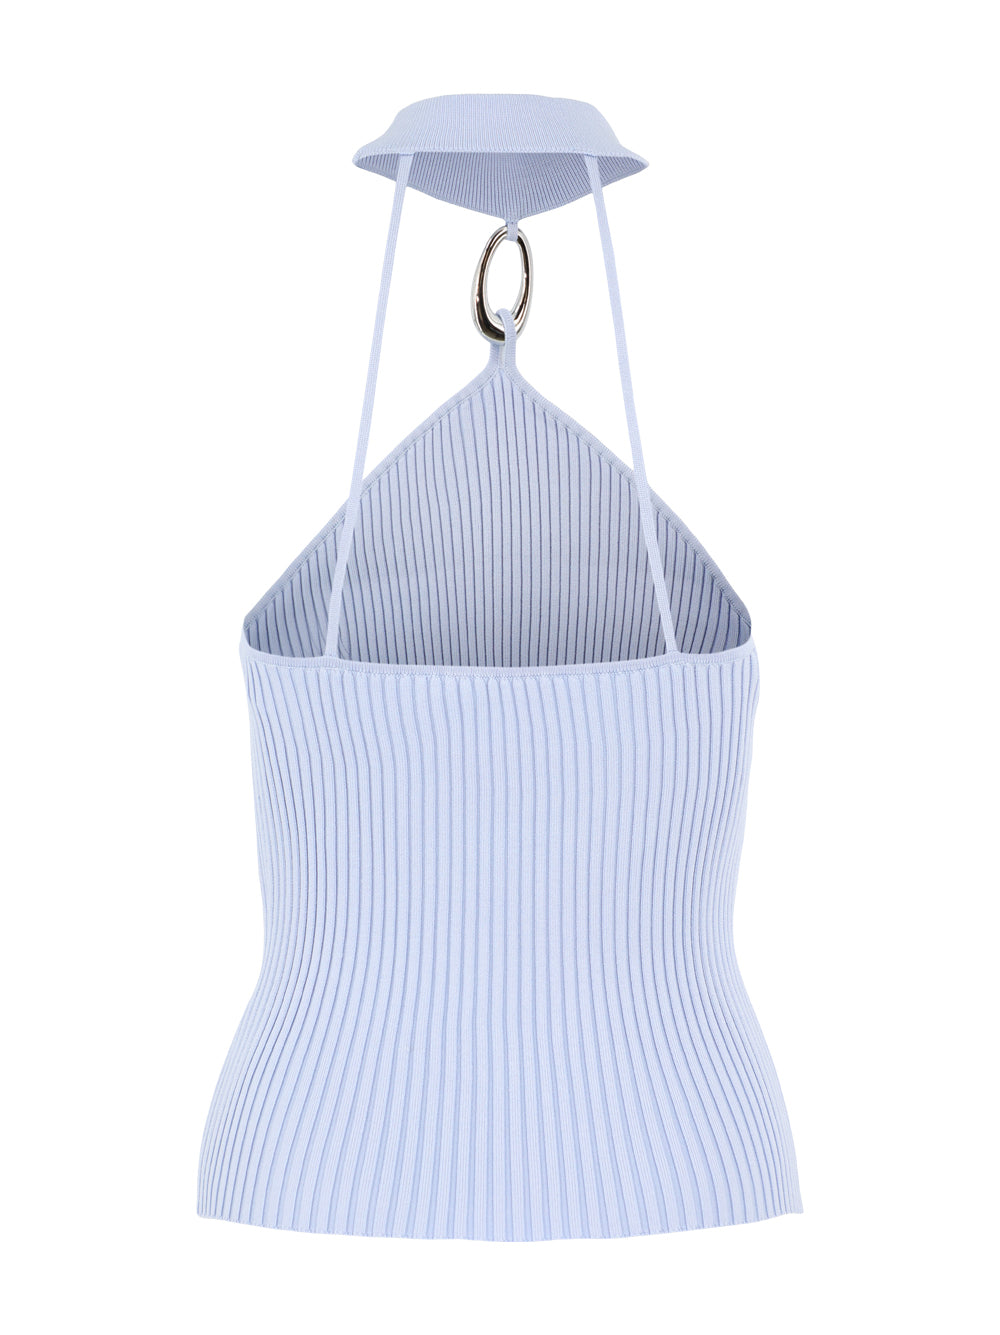 Simkhai Rubie Mock Neck Top With Hardware in French Blue